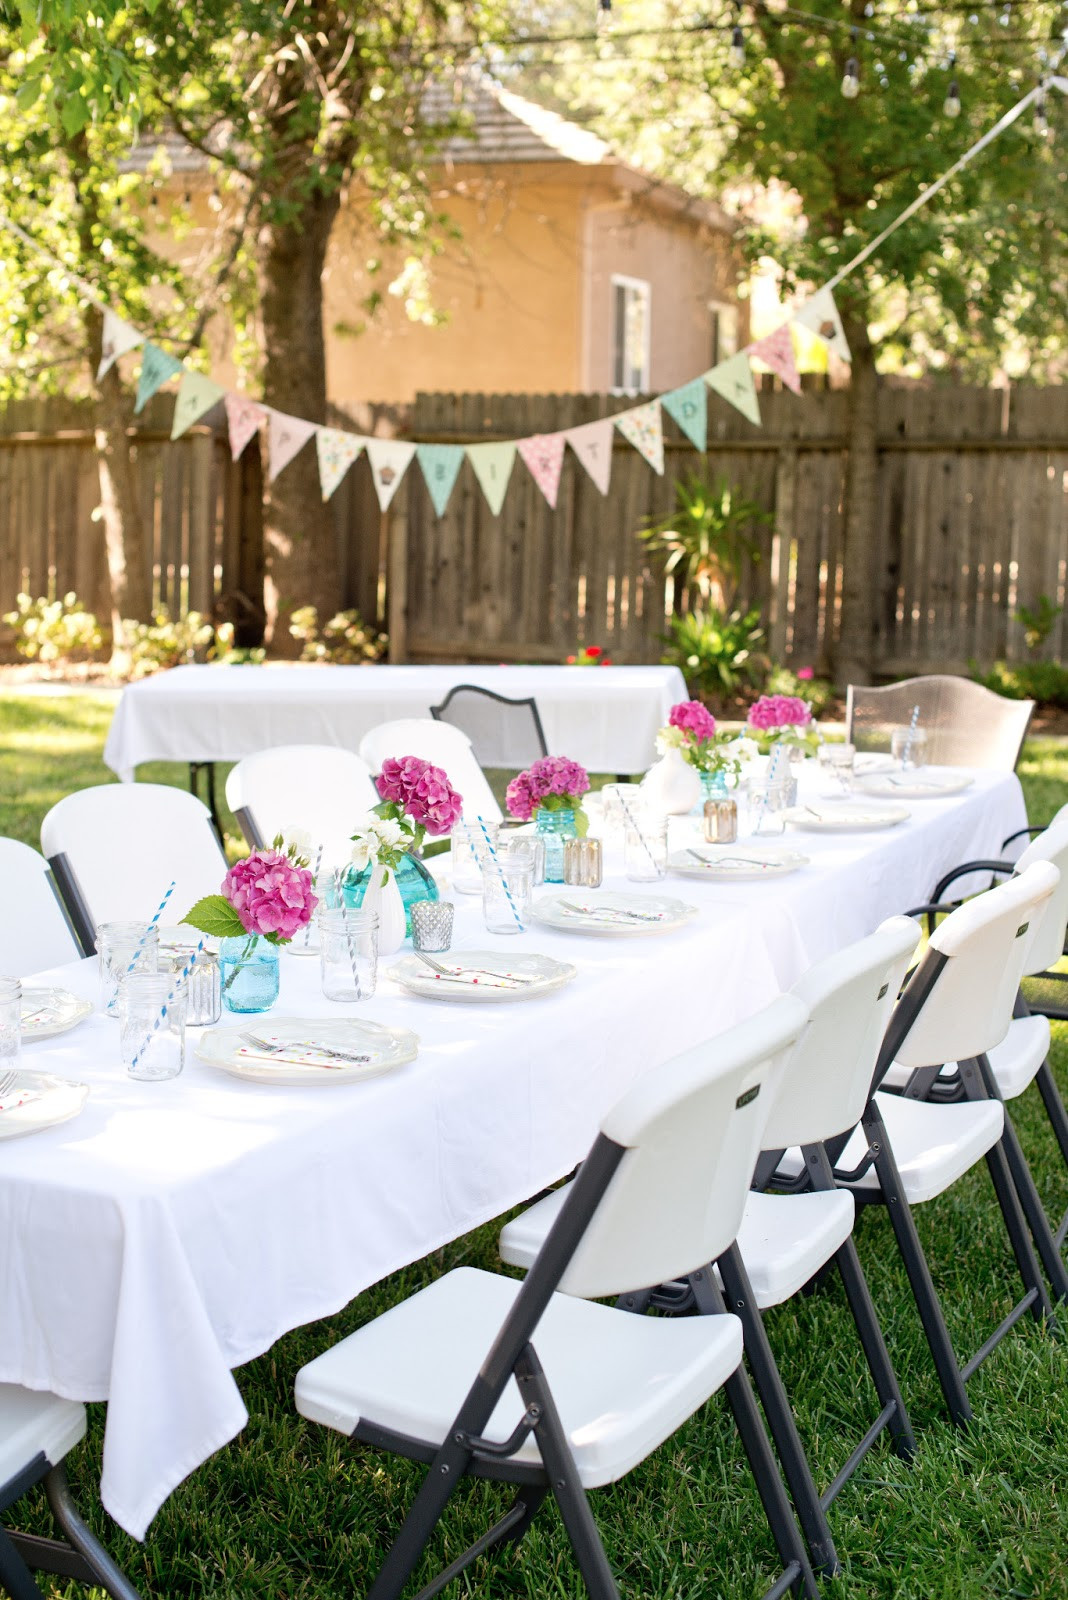 Backyard Party Decor Ideas
 Backyard Party Decorations For Unfor table Moments